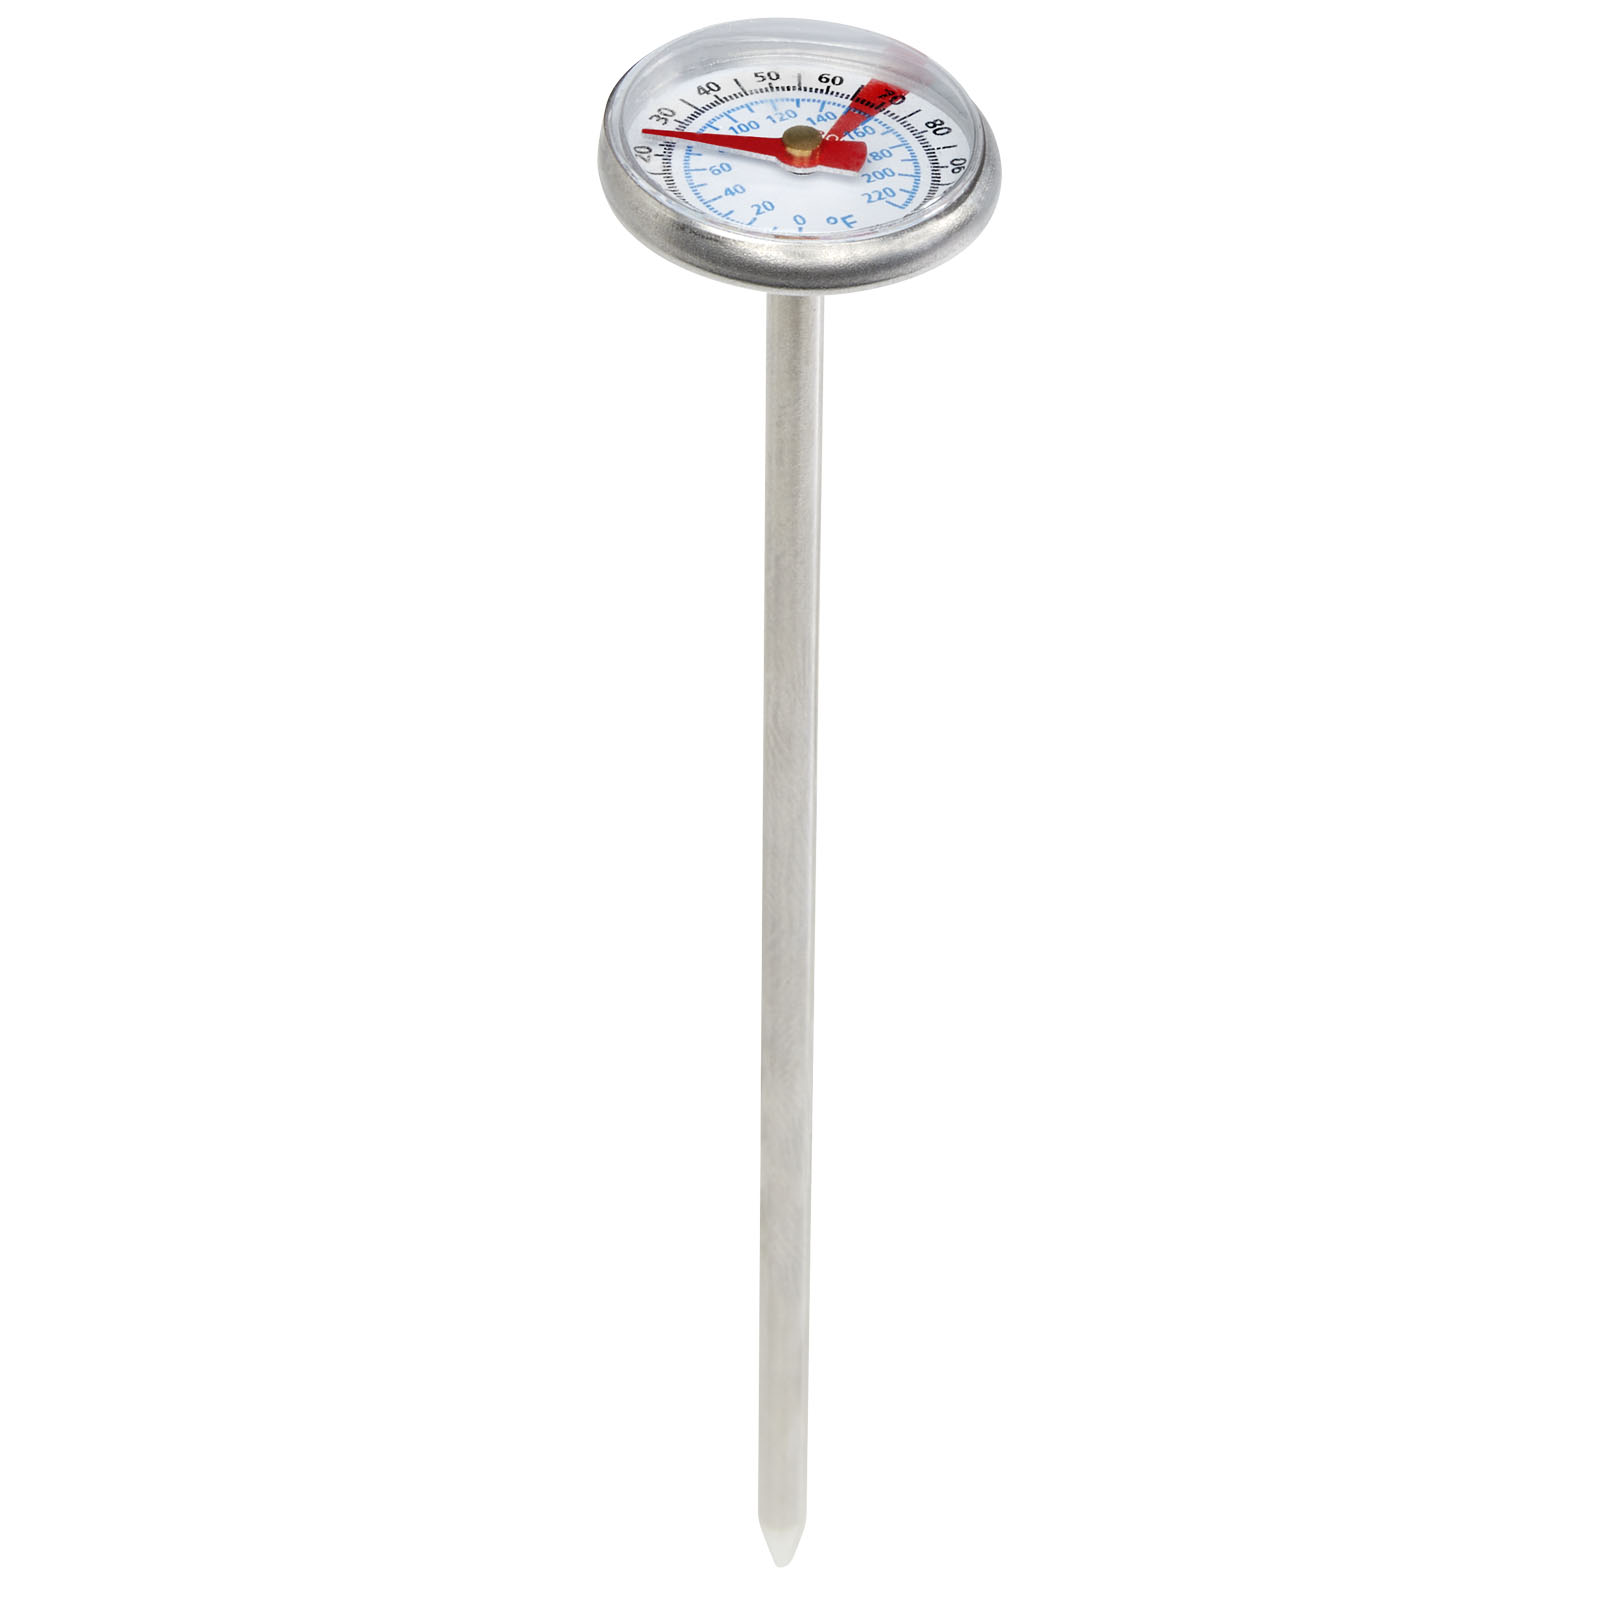 Advertising BBQ Accessories - Met BBQ thermomether - 0